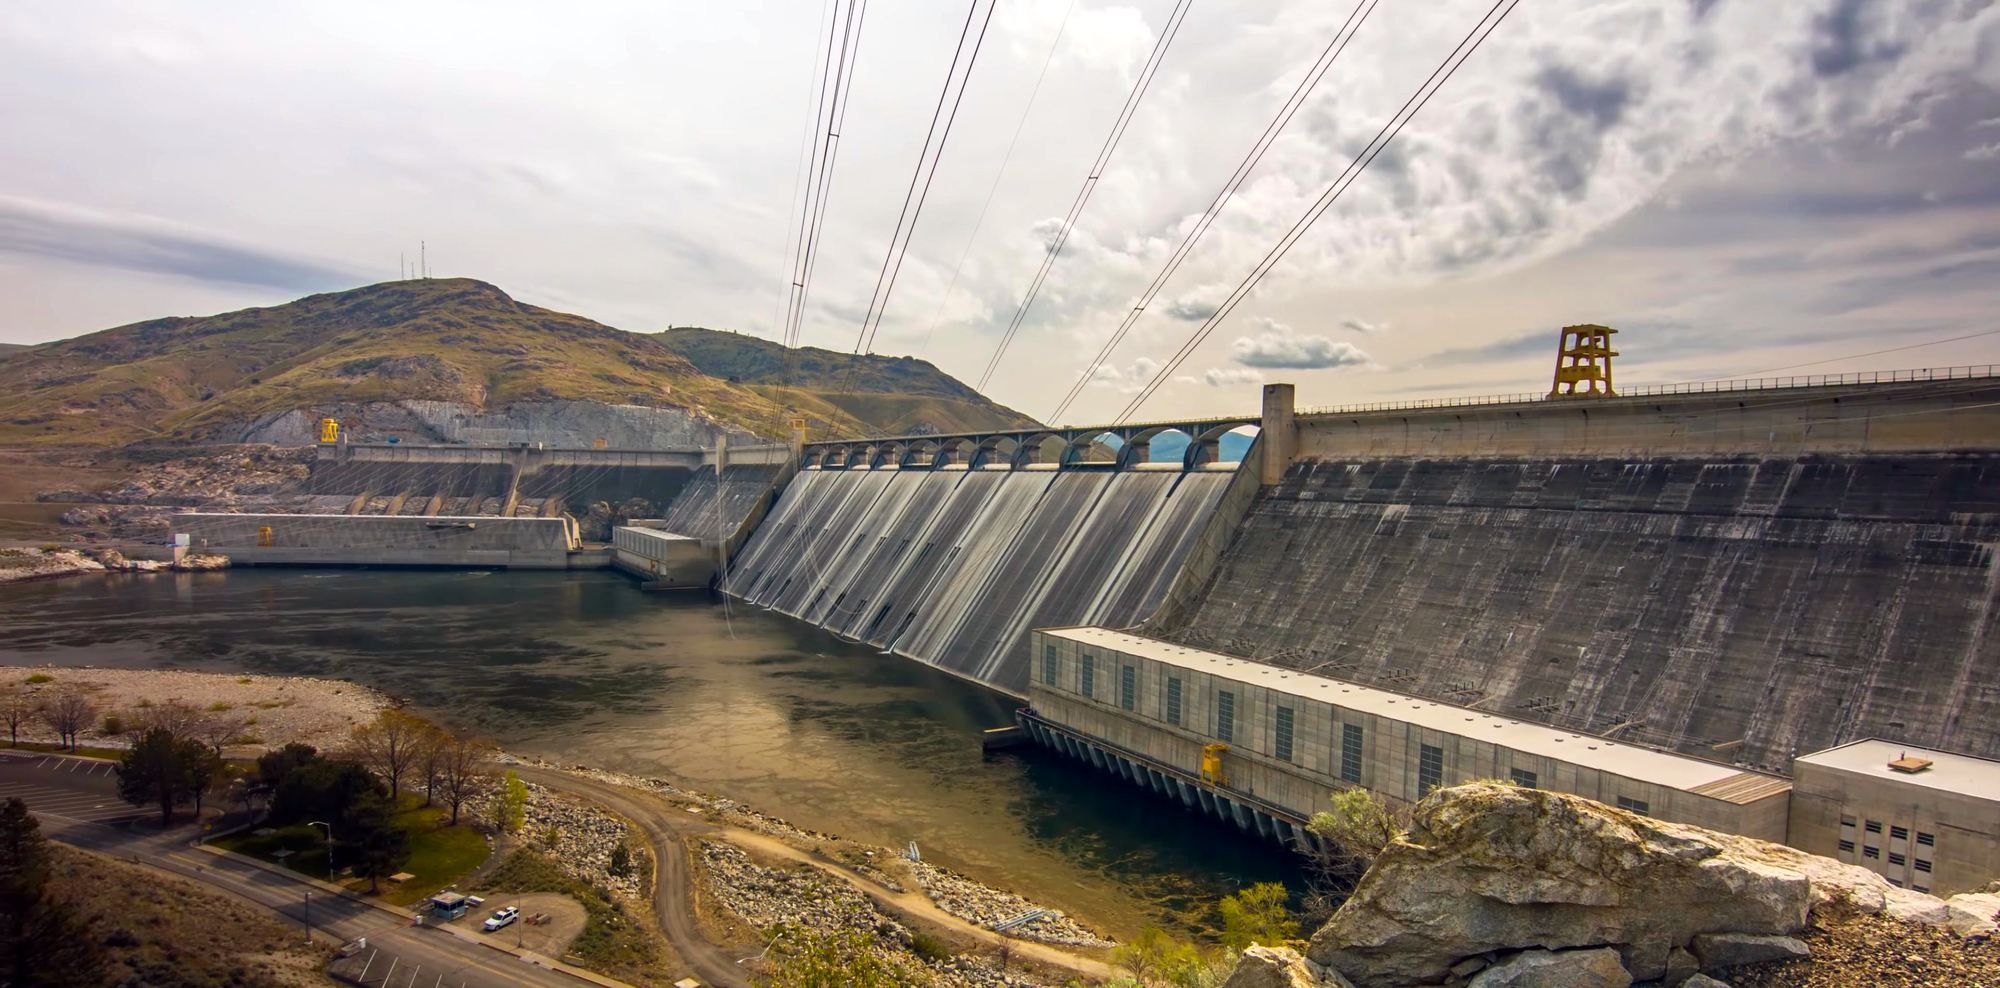 Spokane Tribe says Grand Coulee Dam will permanently destroy their way of life.